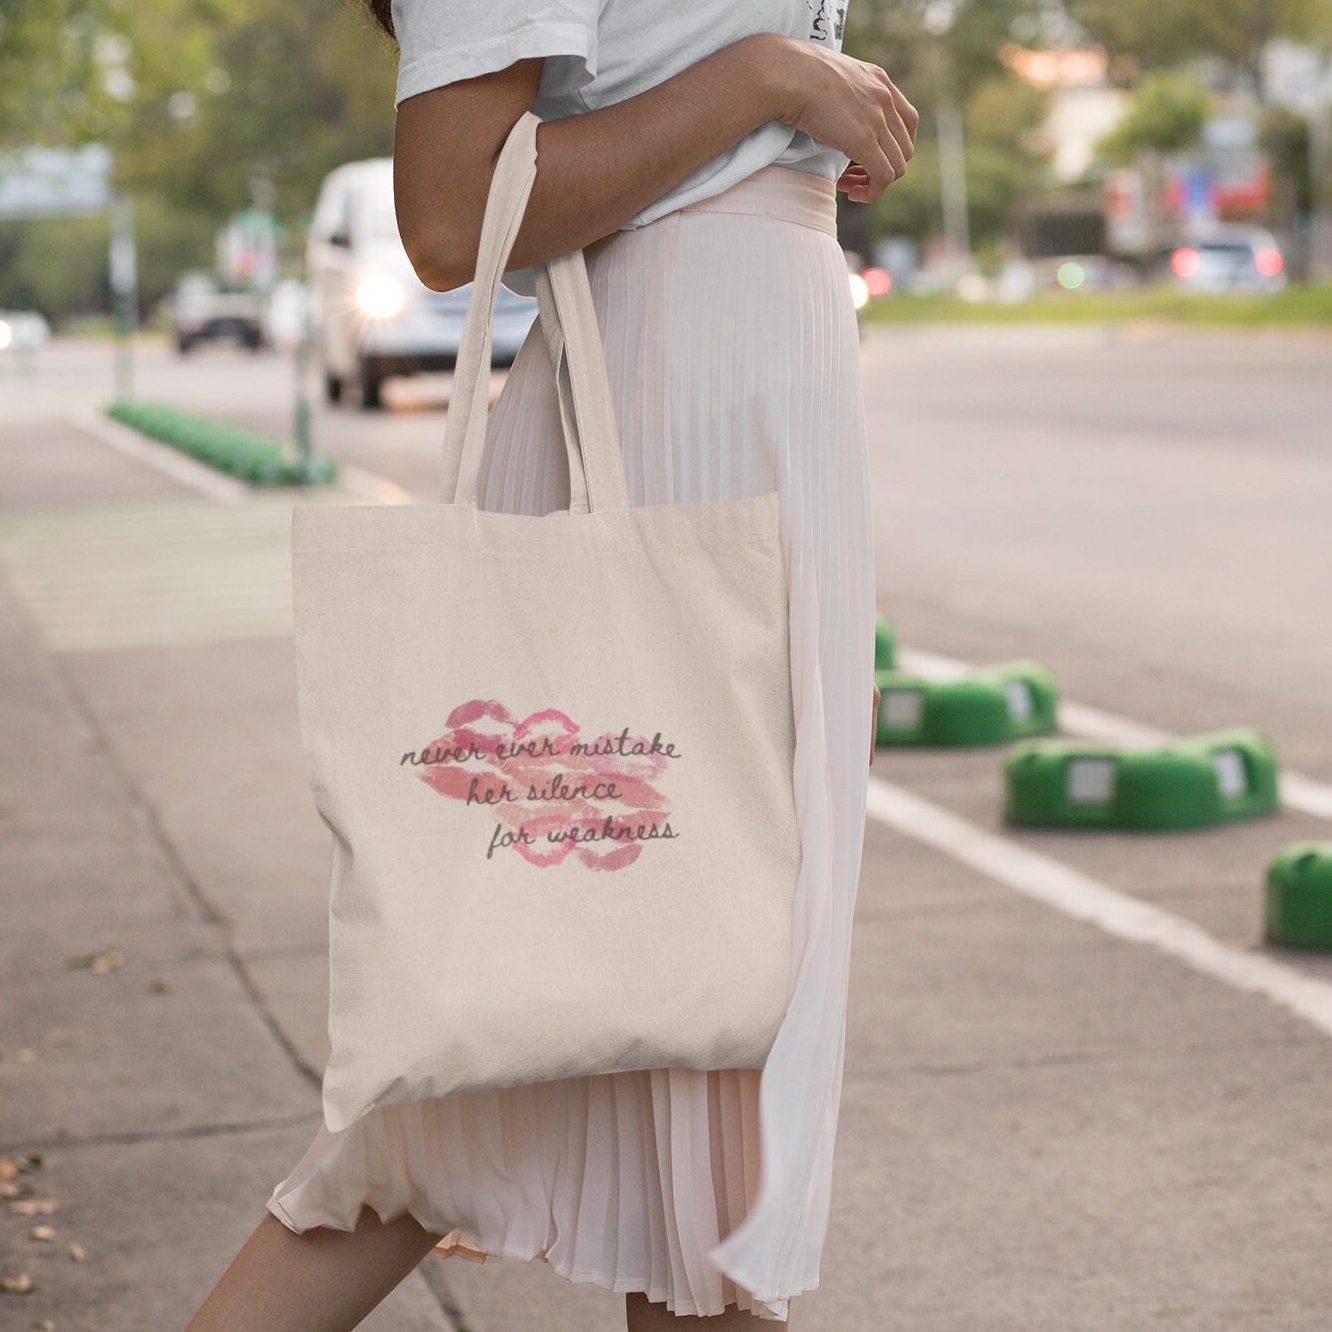 Coquette Women's Open Pink Totes